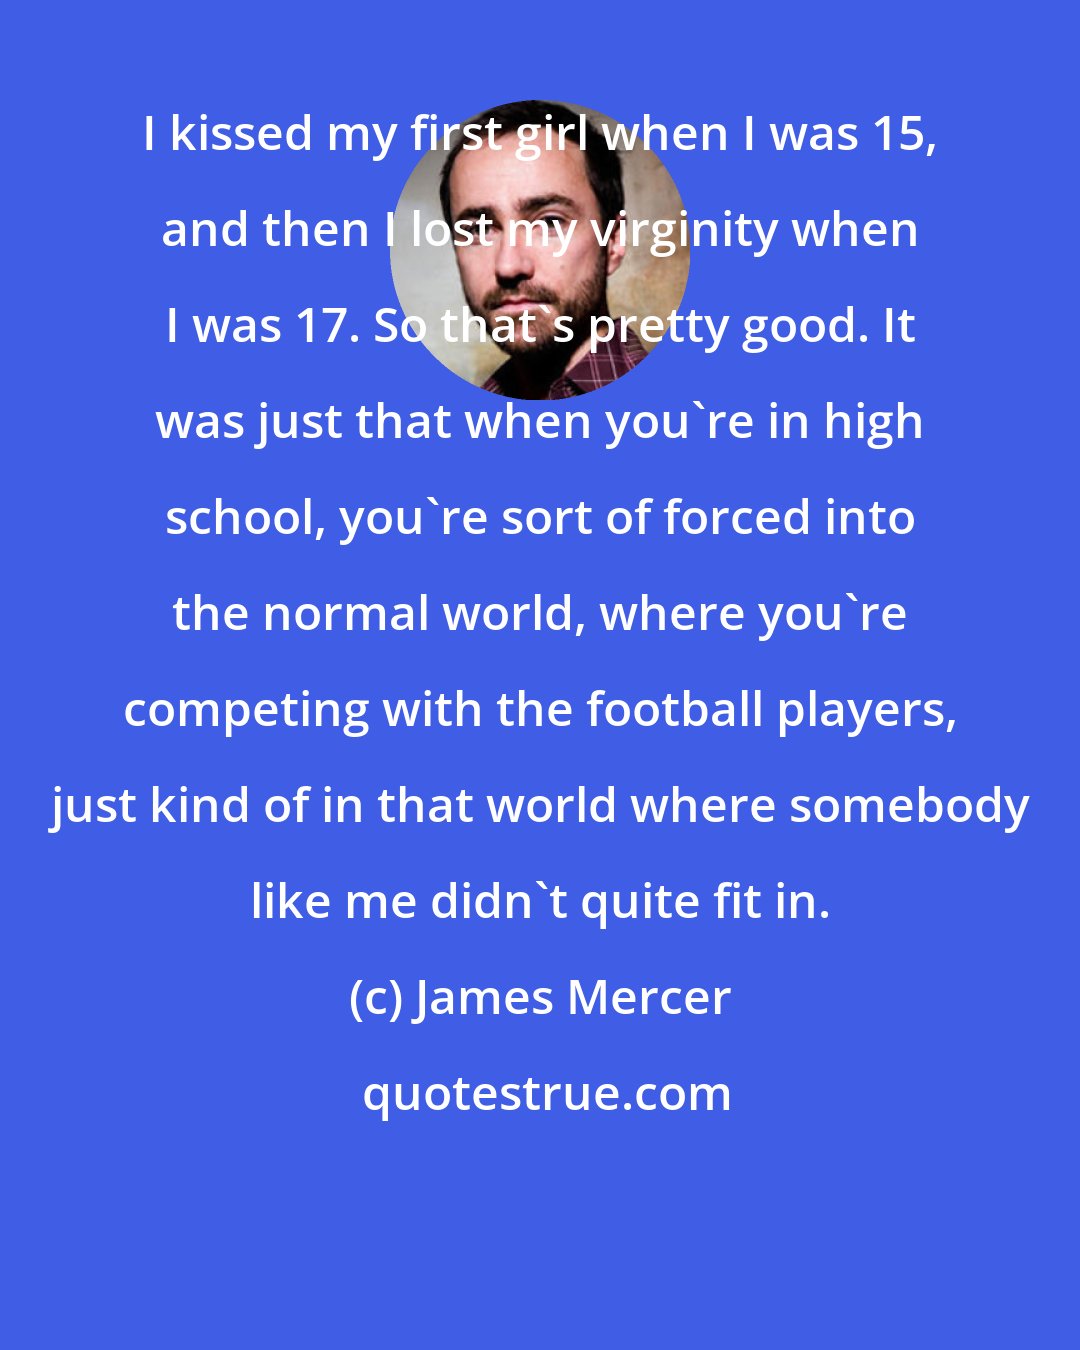 James Mercer: I kissed my first girl when I was 15, and then I lost my virginity when I was 17. So that's pretty good. It was just that when you're in high school, you're sort of forced into the normal world, where you're competing with the football players, just kind of in that world where somebody like me didn't quite fit in.